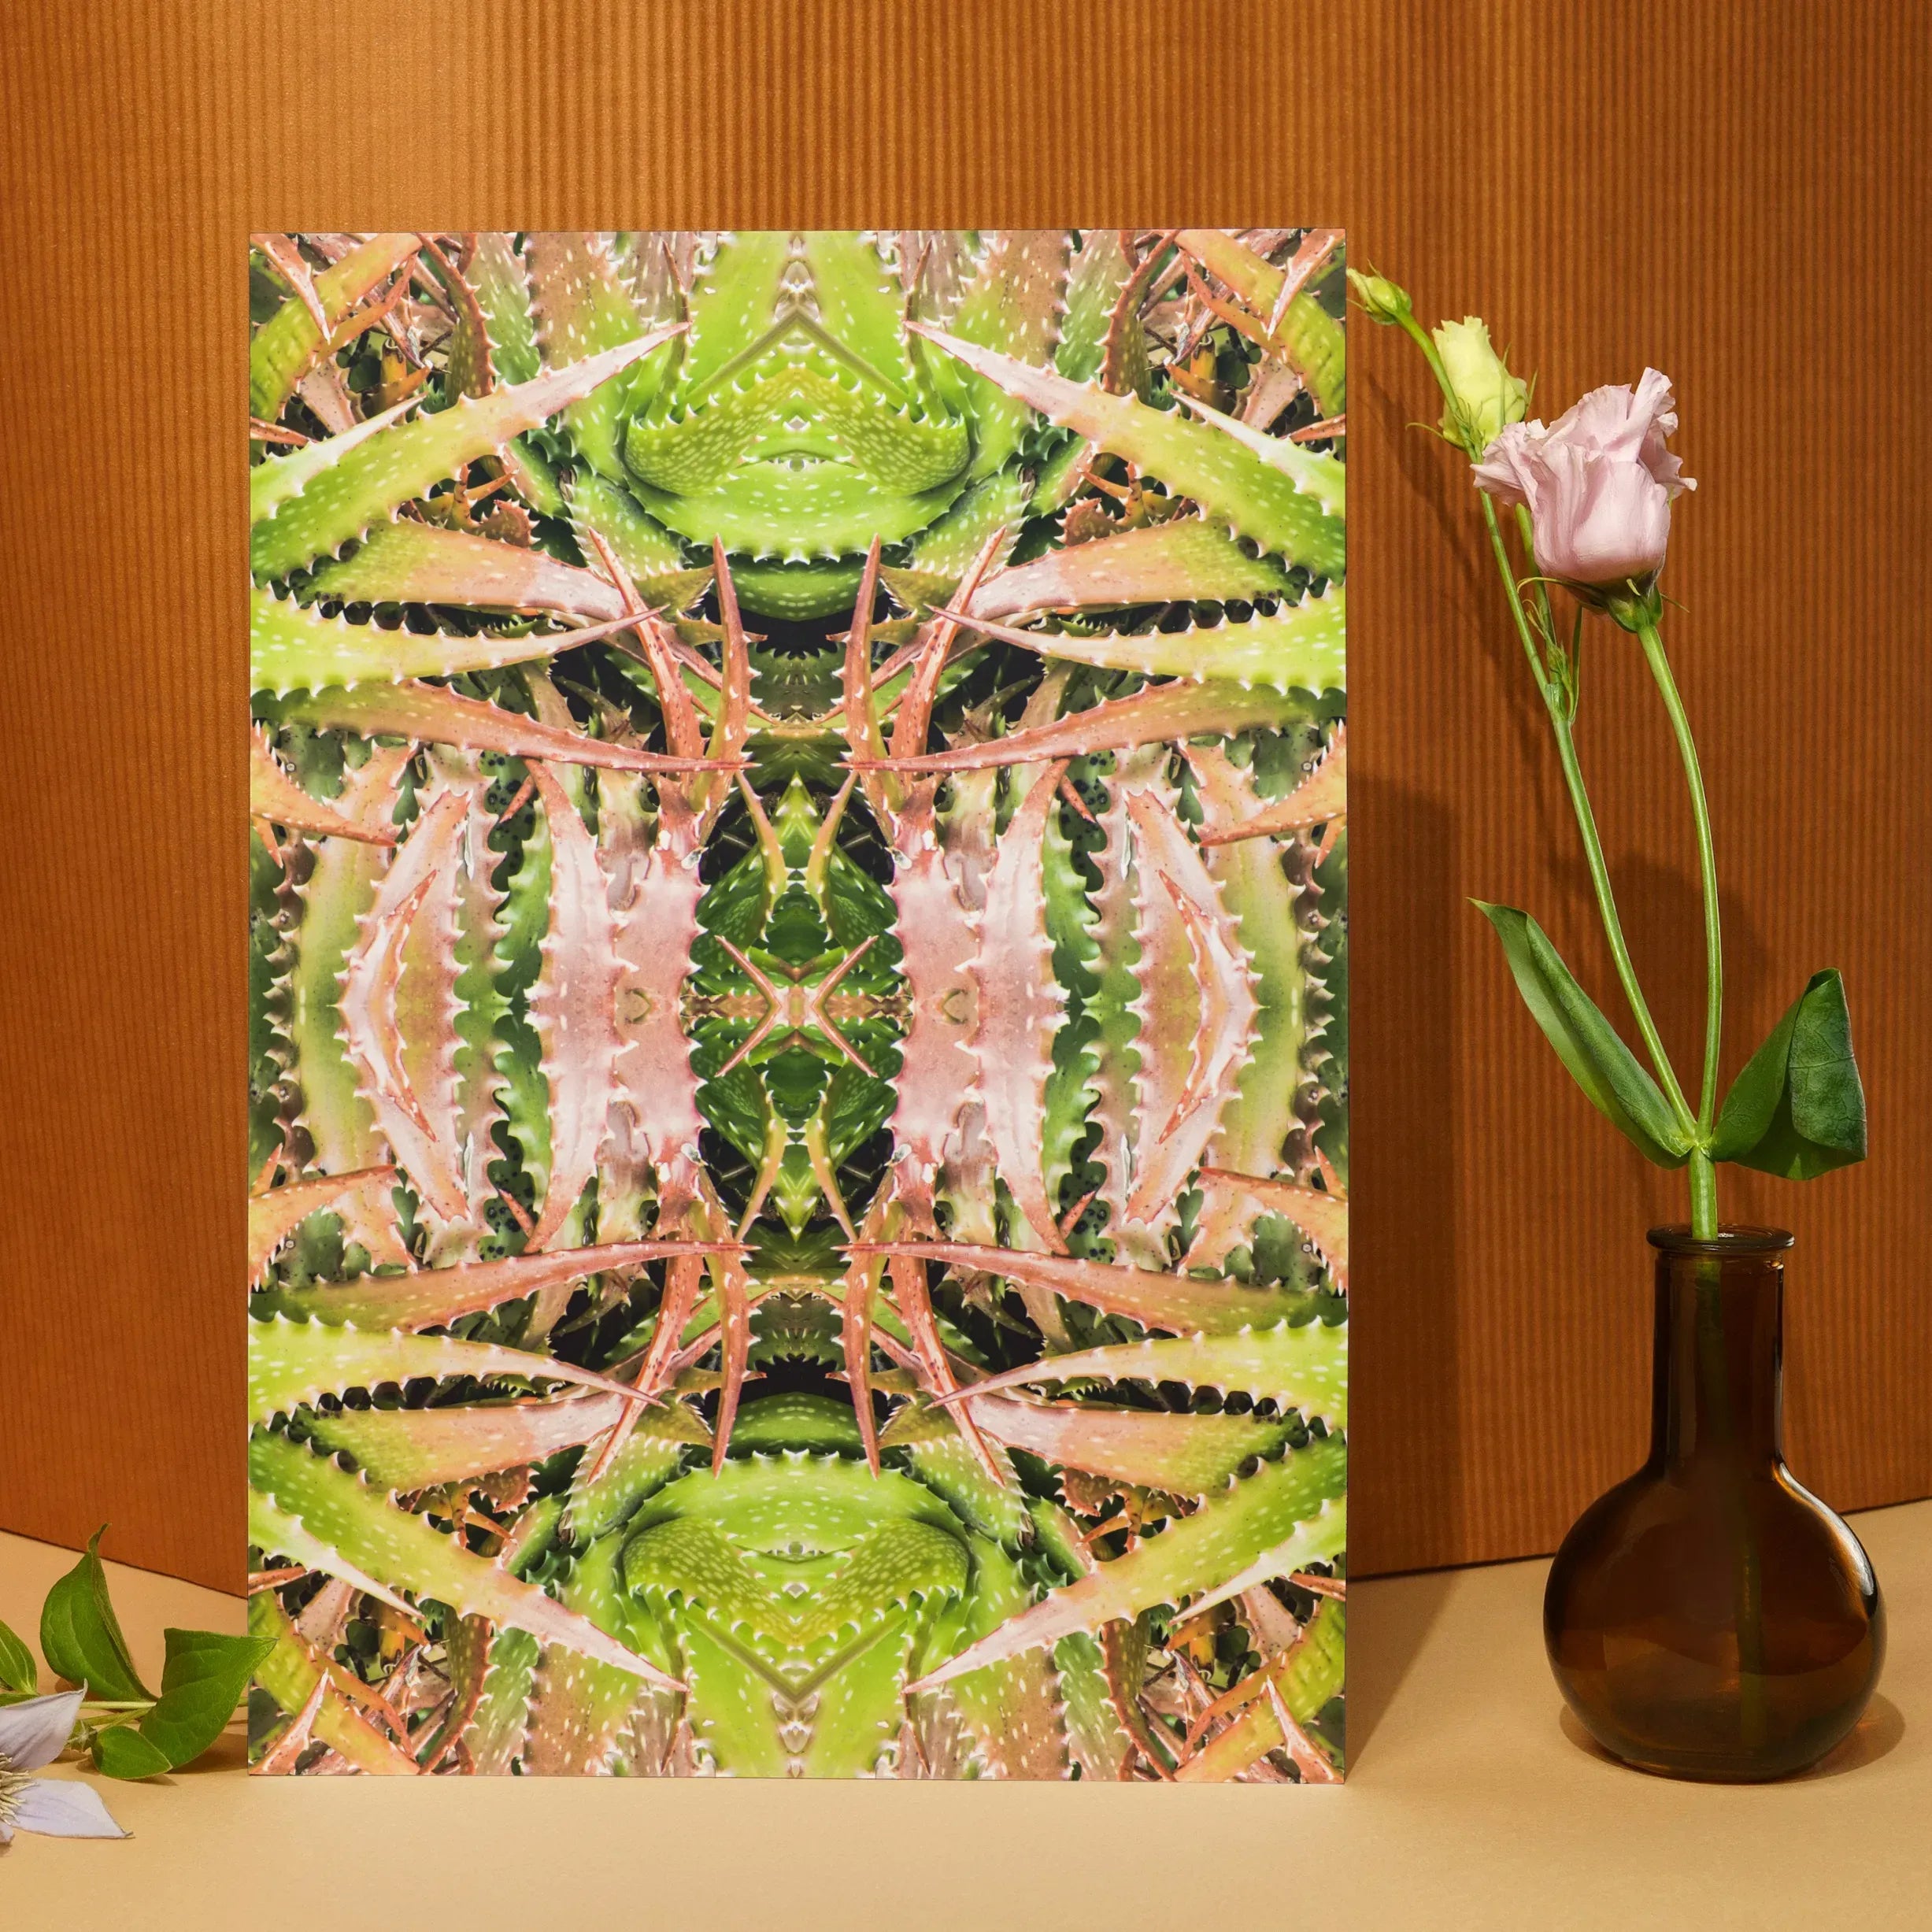 Centre Stage - Trippy Cactus Succulent Art Greeting Card - Greeting & Note Cards - Aesthetic Art